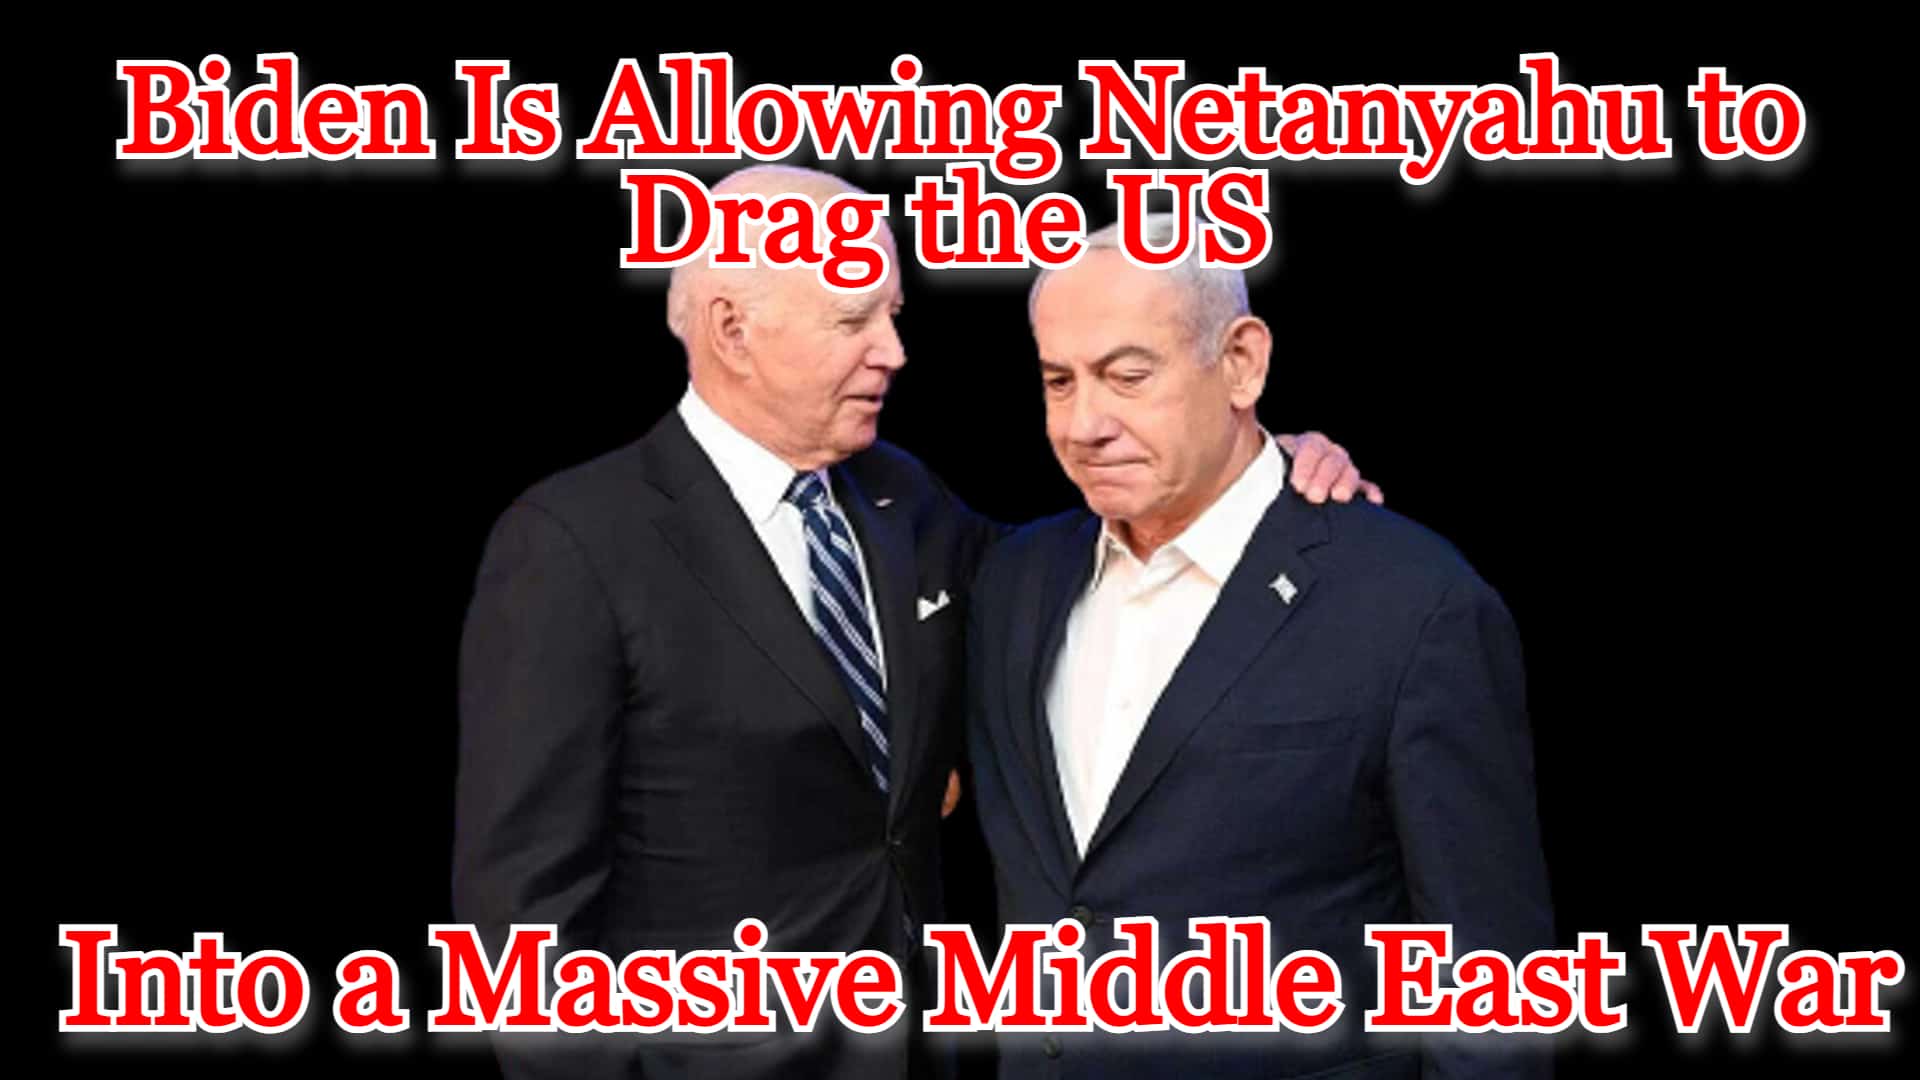 COI #489: Biden Is Allowing Netanyahu to Drag the US into a Massive Middle East War